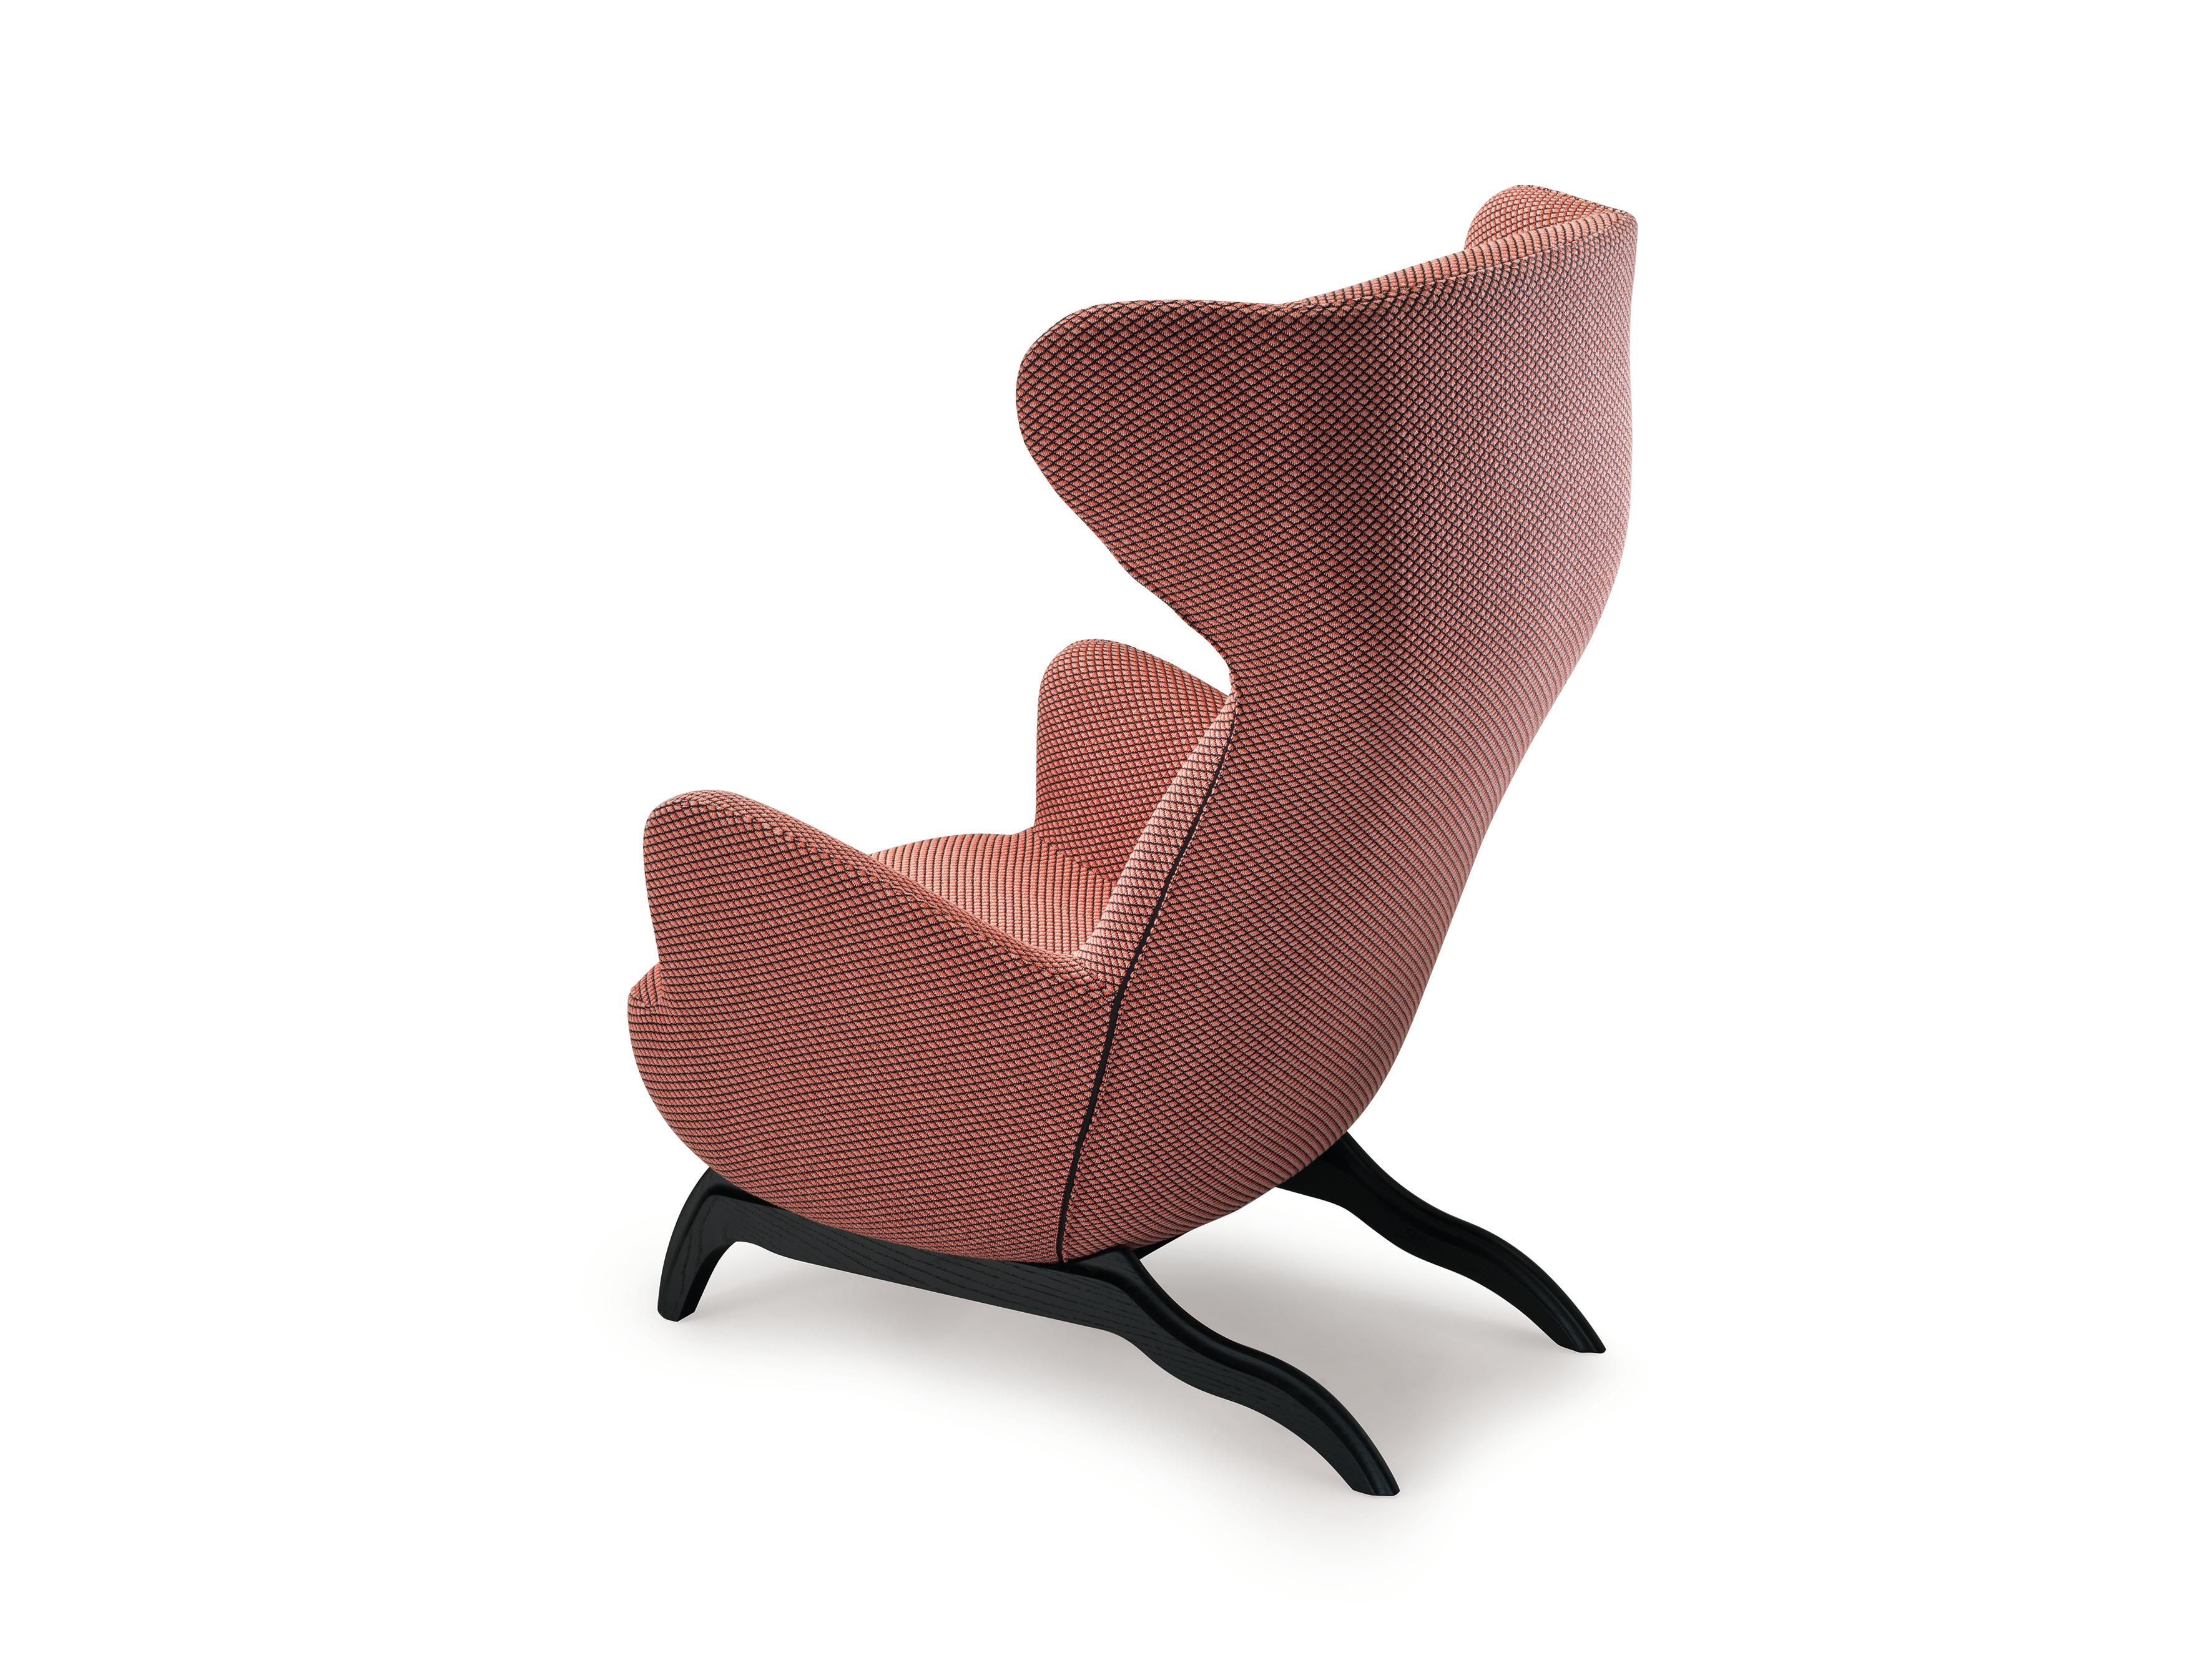 Armchair/ Bergére. Base in solid natural or black varnished oak, or in solid natural Canaletto walnut; wax-finished varnish. Steel frame, with elastic strips suspension. Upholstery in self-extinguishing polyurethane foam/heat-bound polyester fibre.